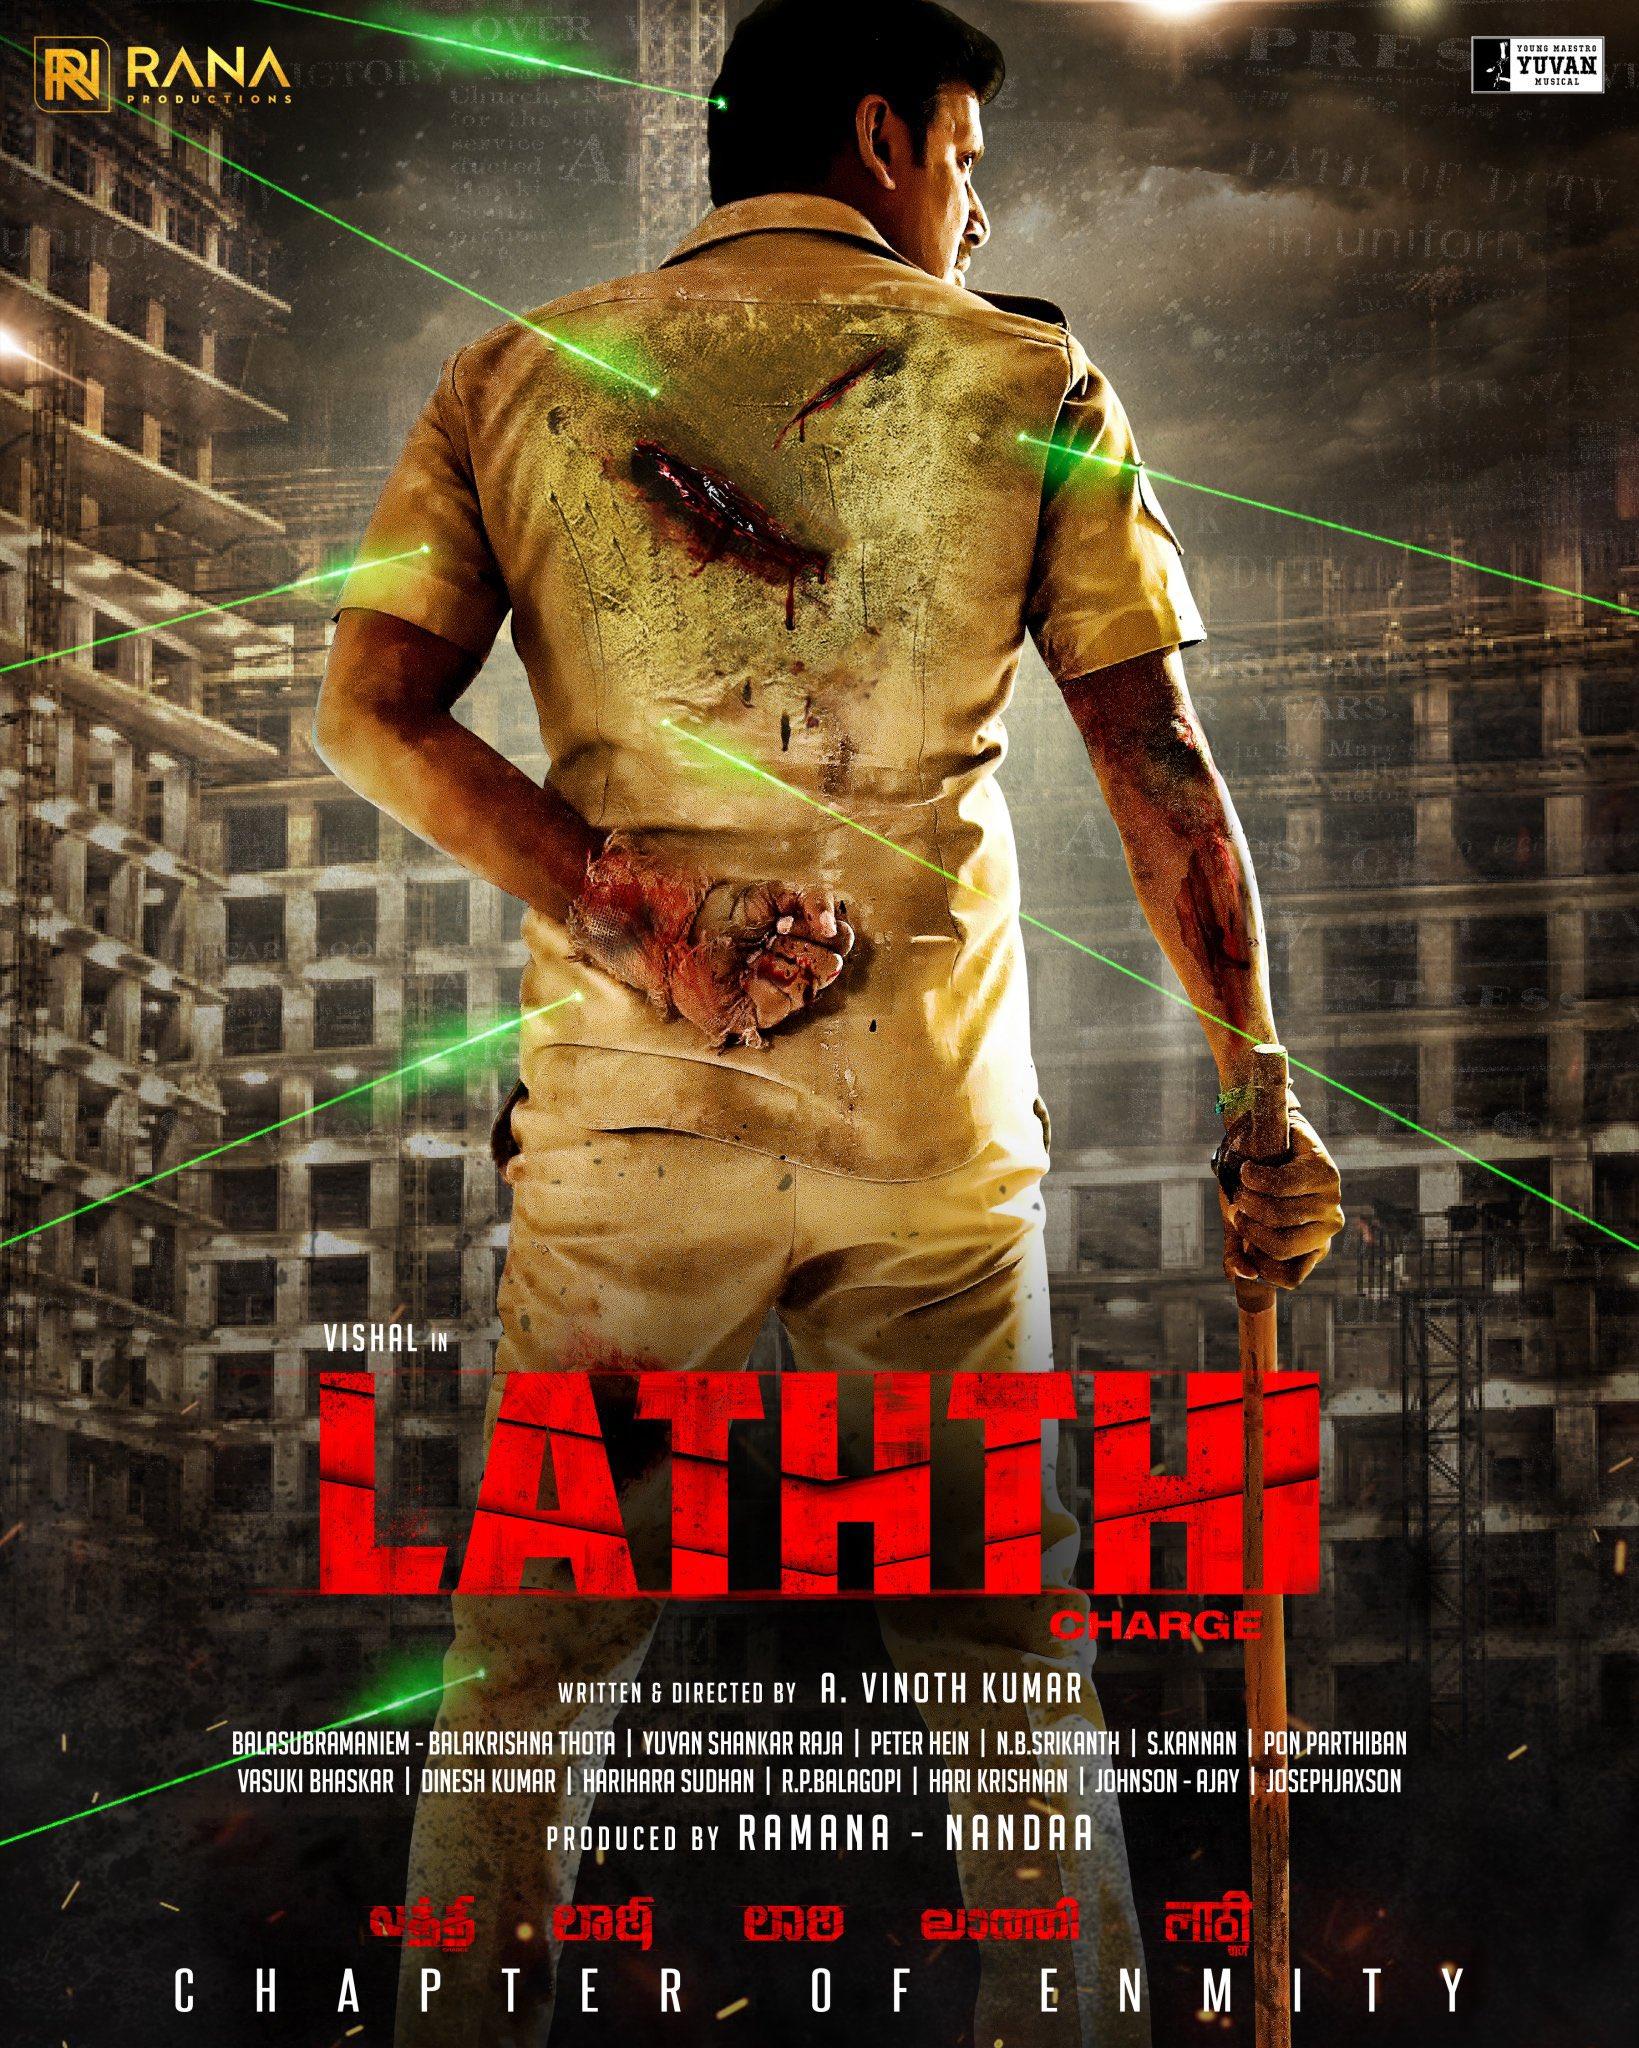 laththi trailer video getting trending and views on social media 